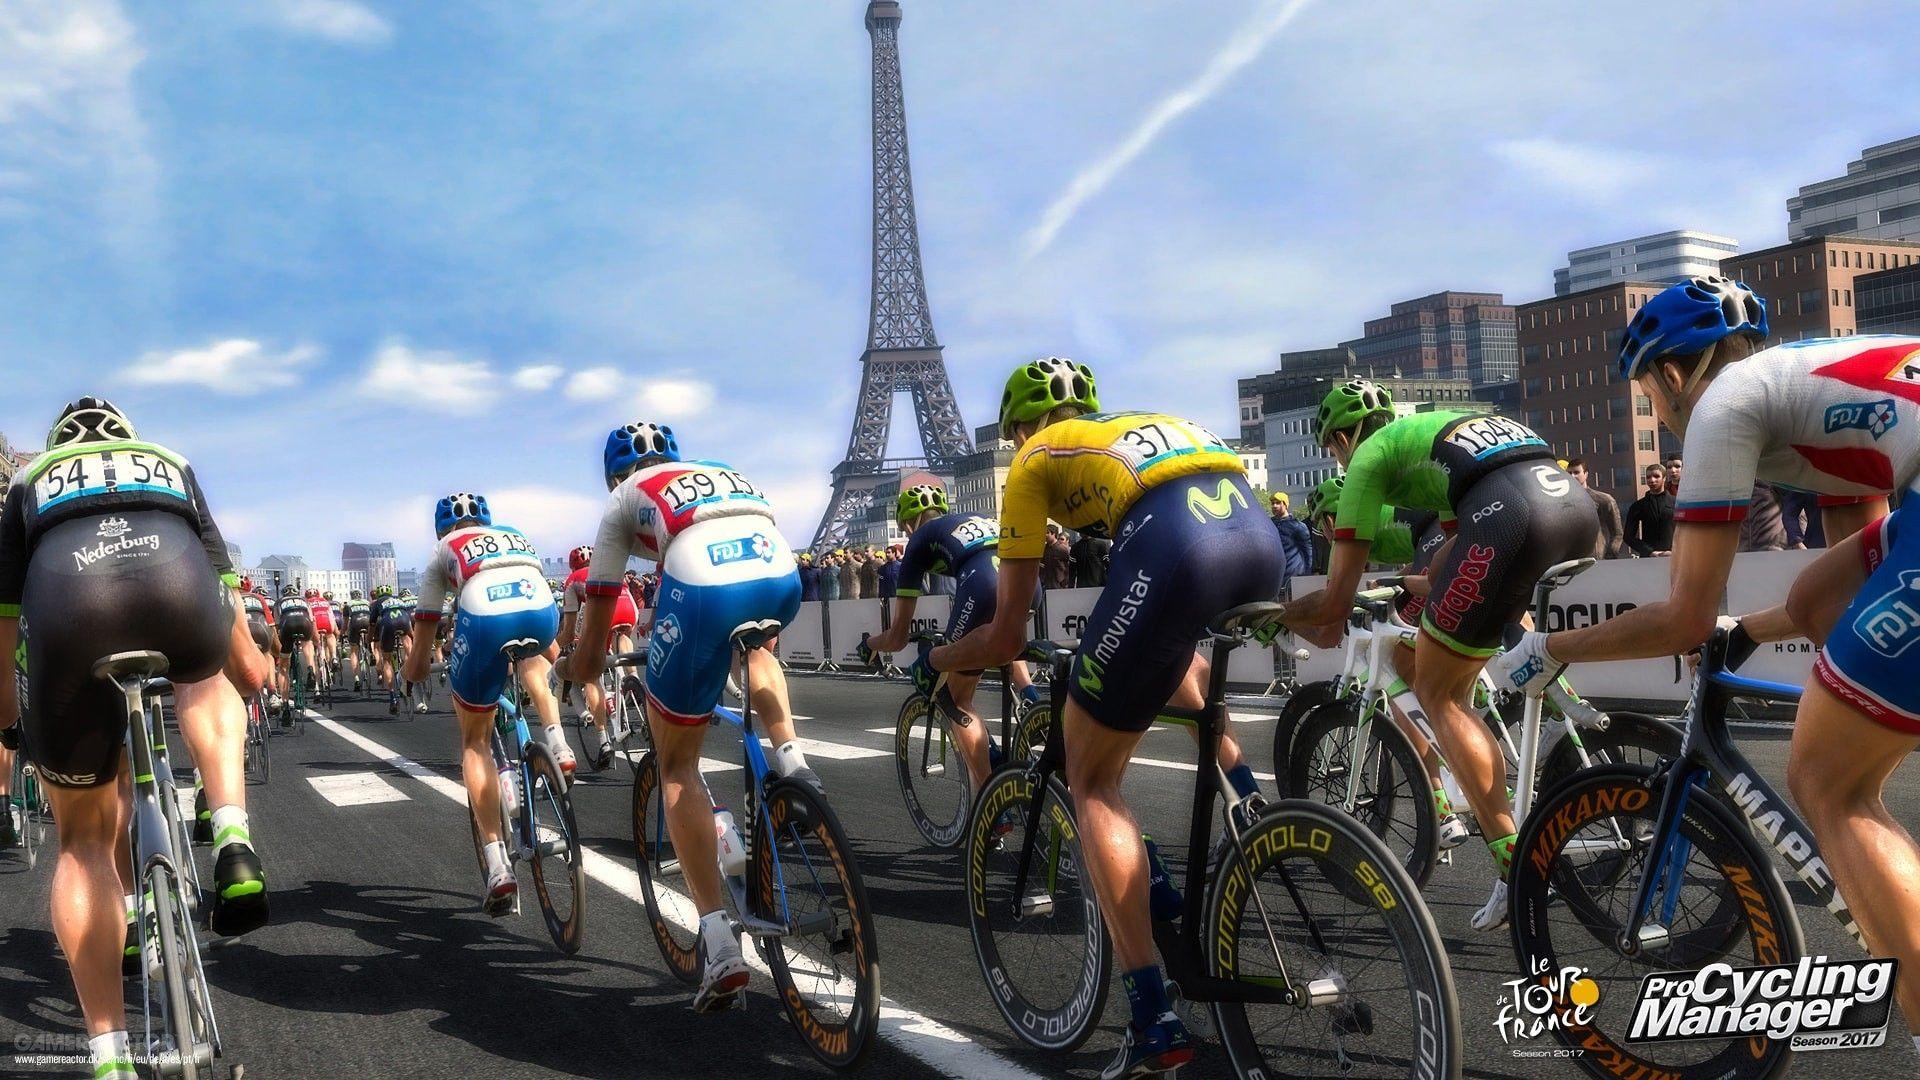 We have new screens for Tour de France 2017